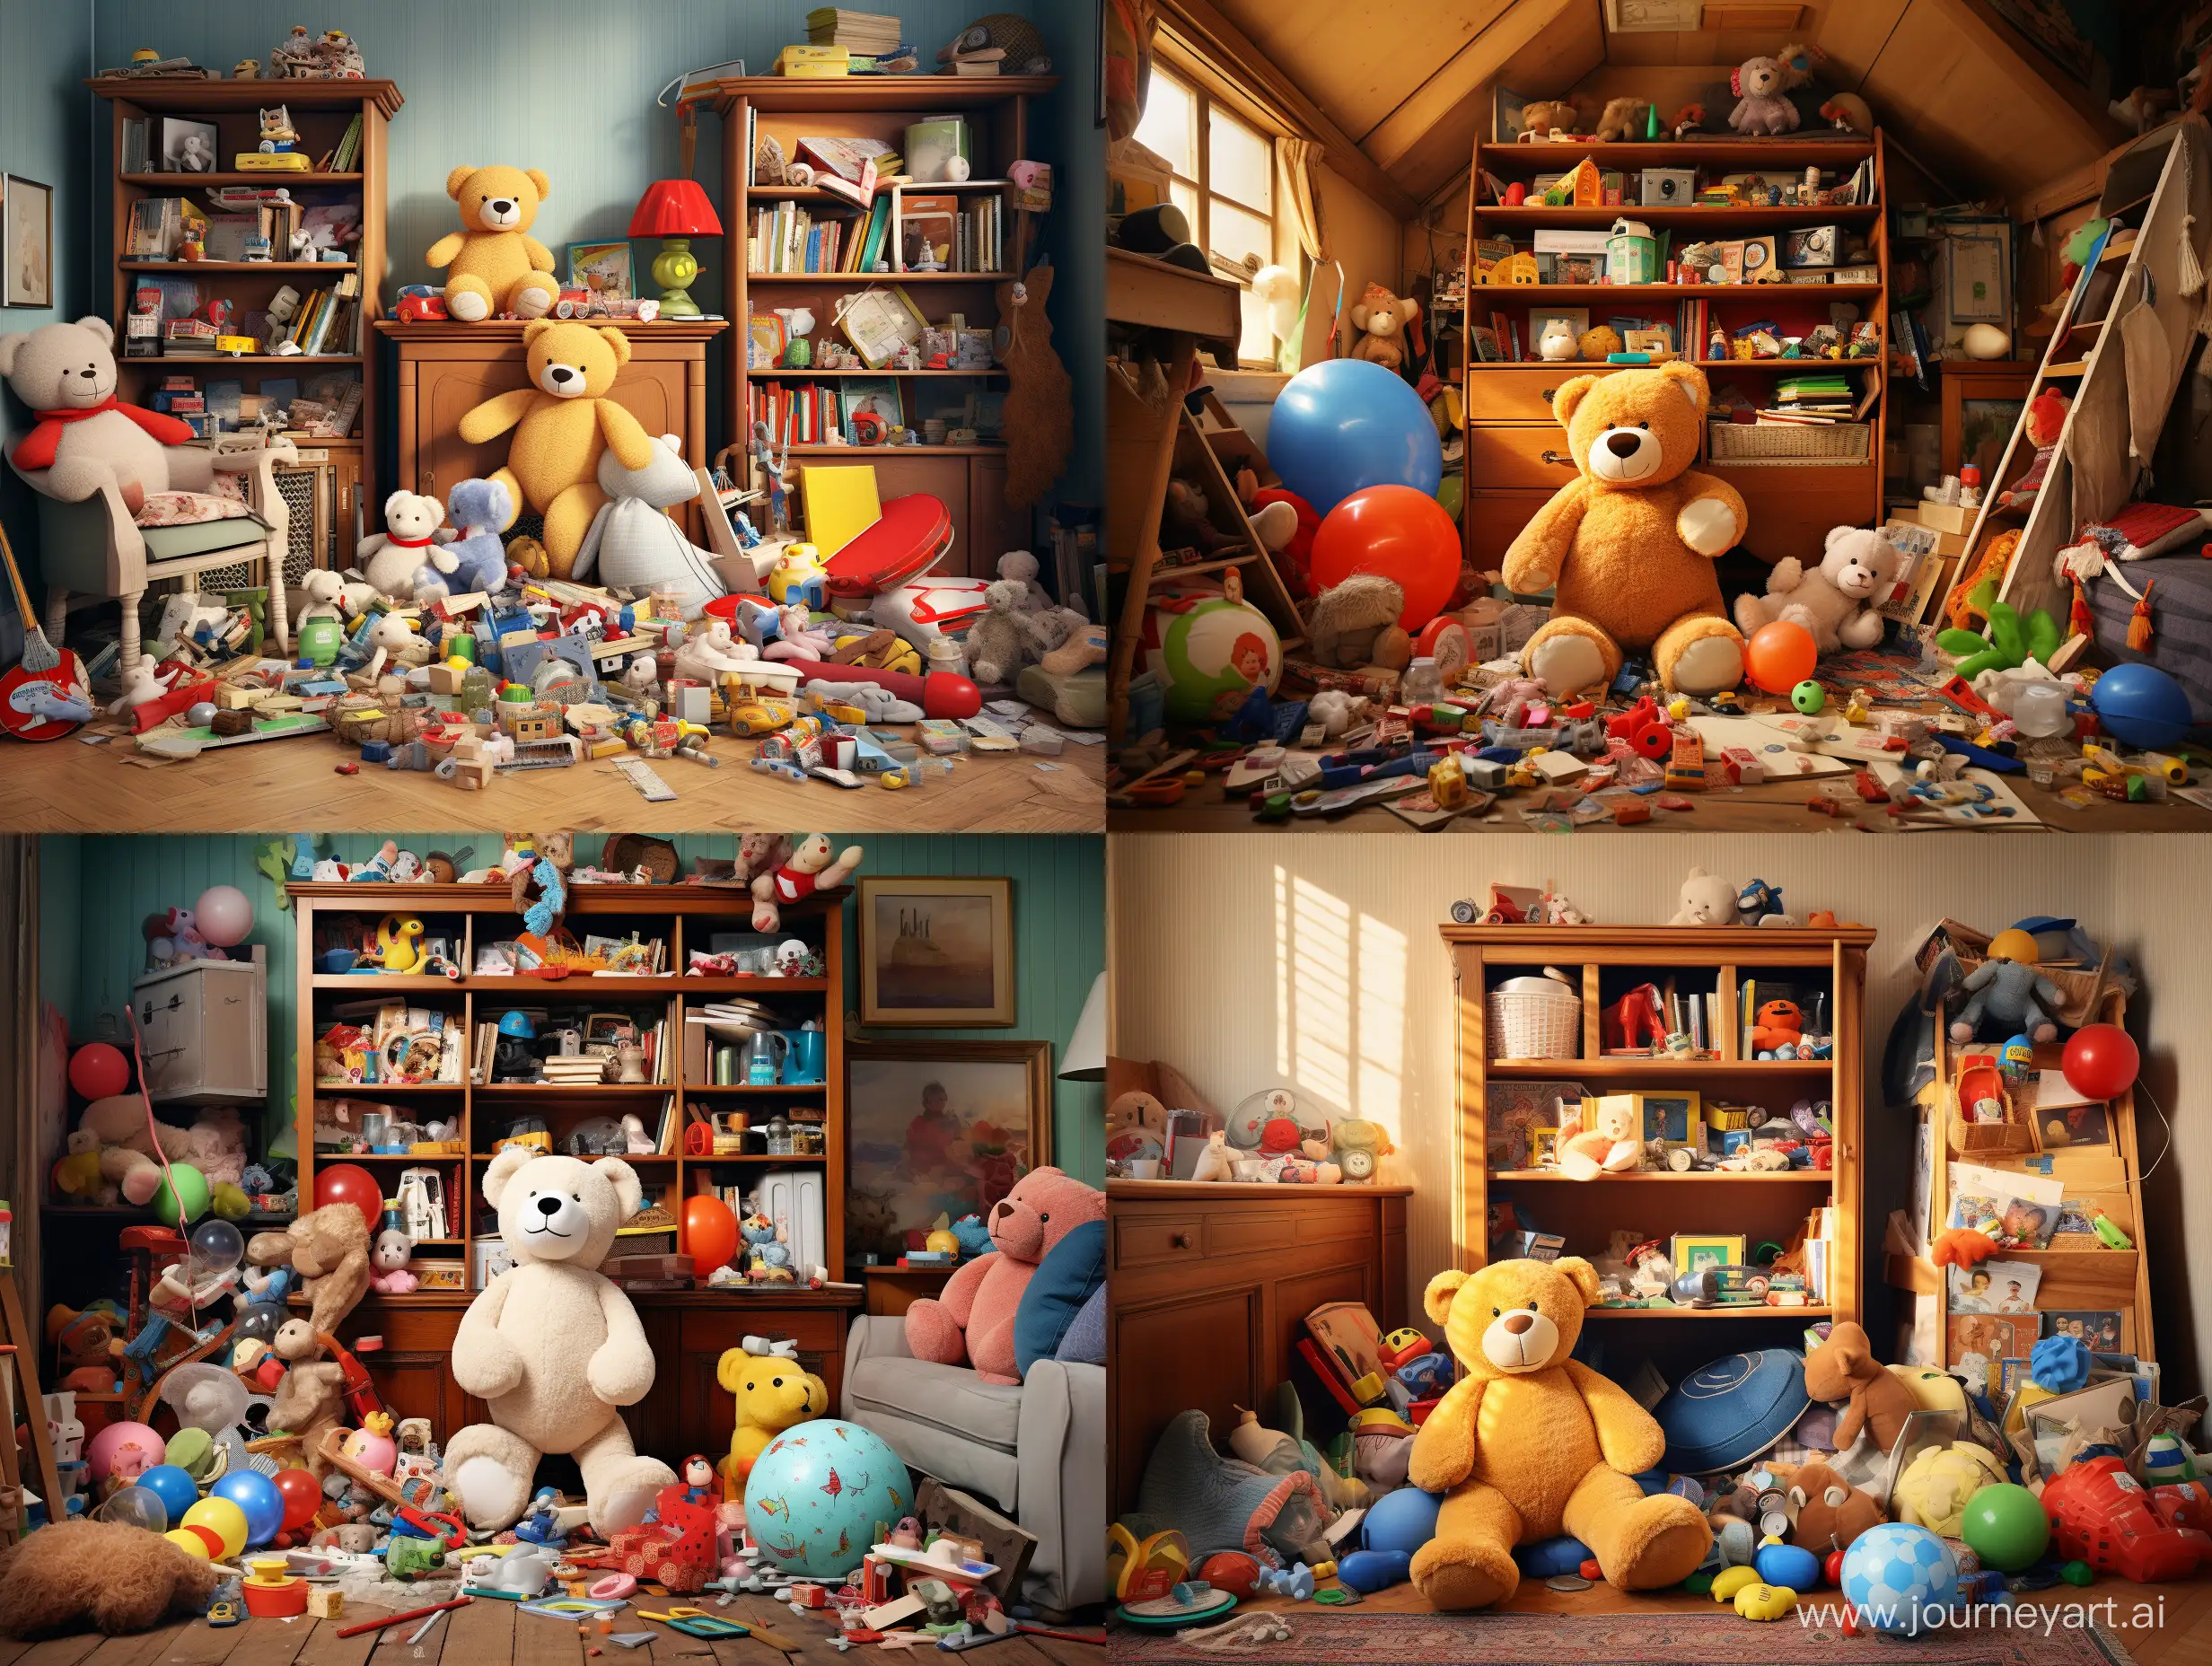 Joyful-Toy-Room-Chaos-Playful-Scene-with-Toys-and-Cupboard